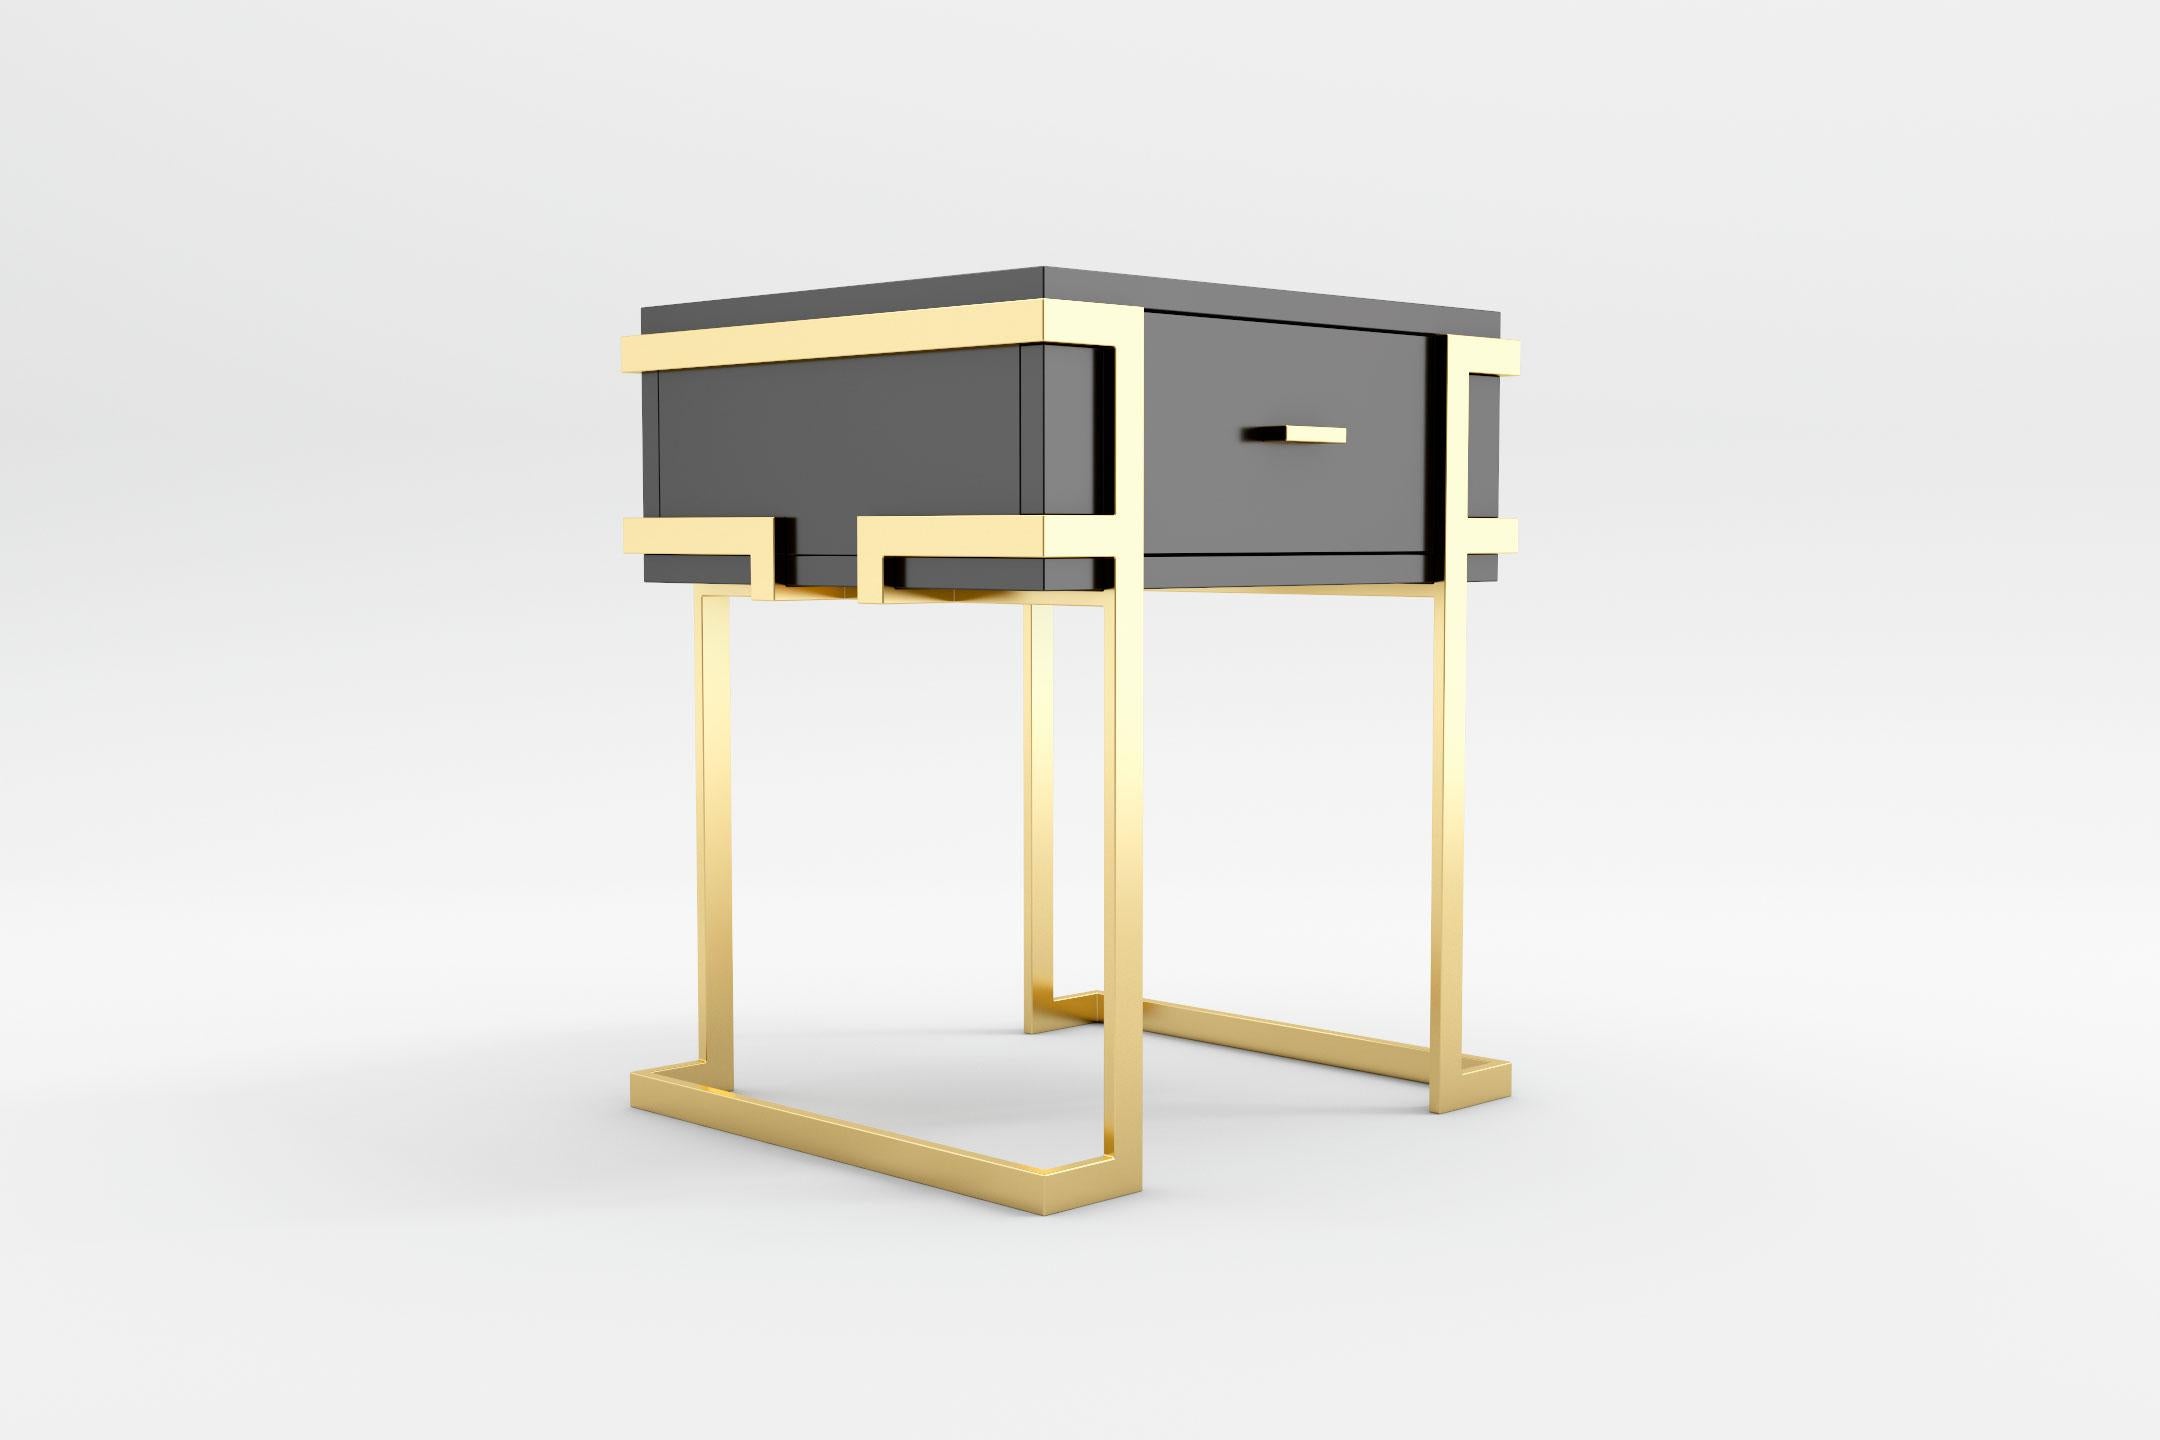 The Elemental collection encloses in its elegant yet simple shapes a minimalist design that blends premium materials and outstanding craftsmanship in a unique design. This piece is built in lacquered solid wood with a polished brass structure and an